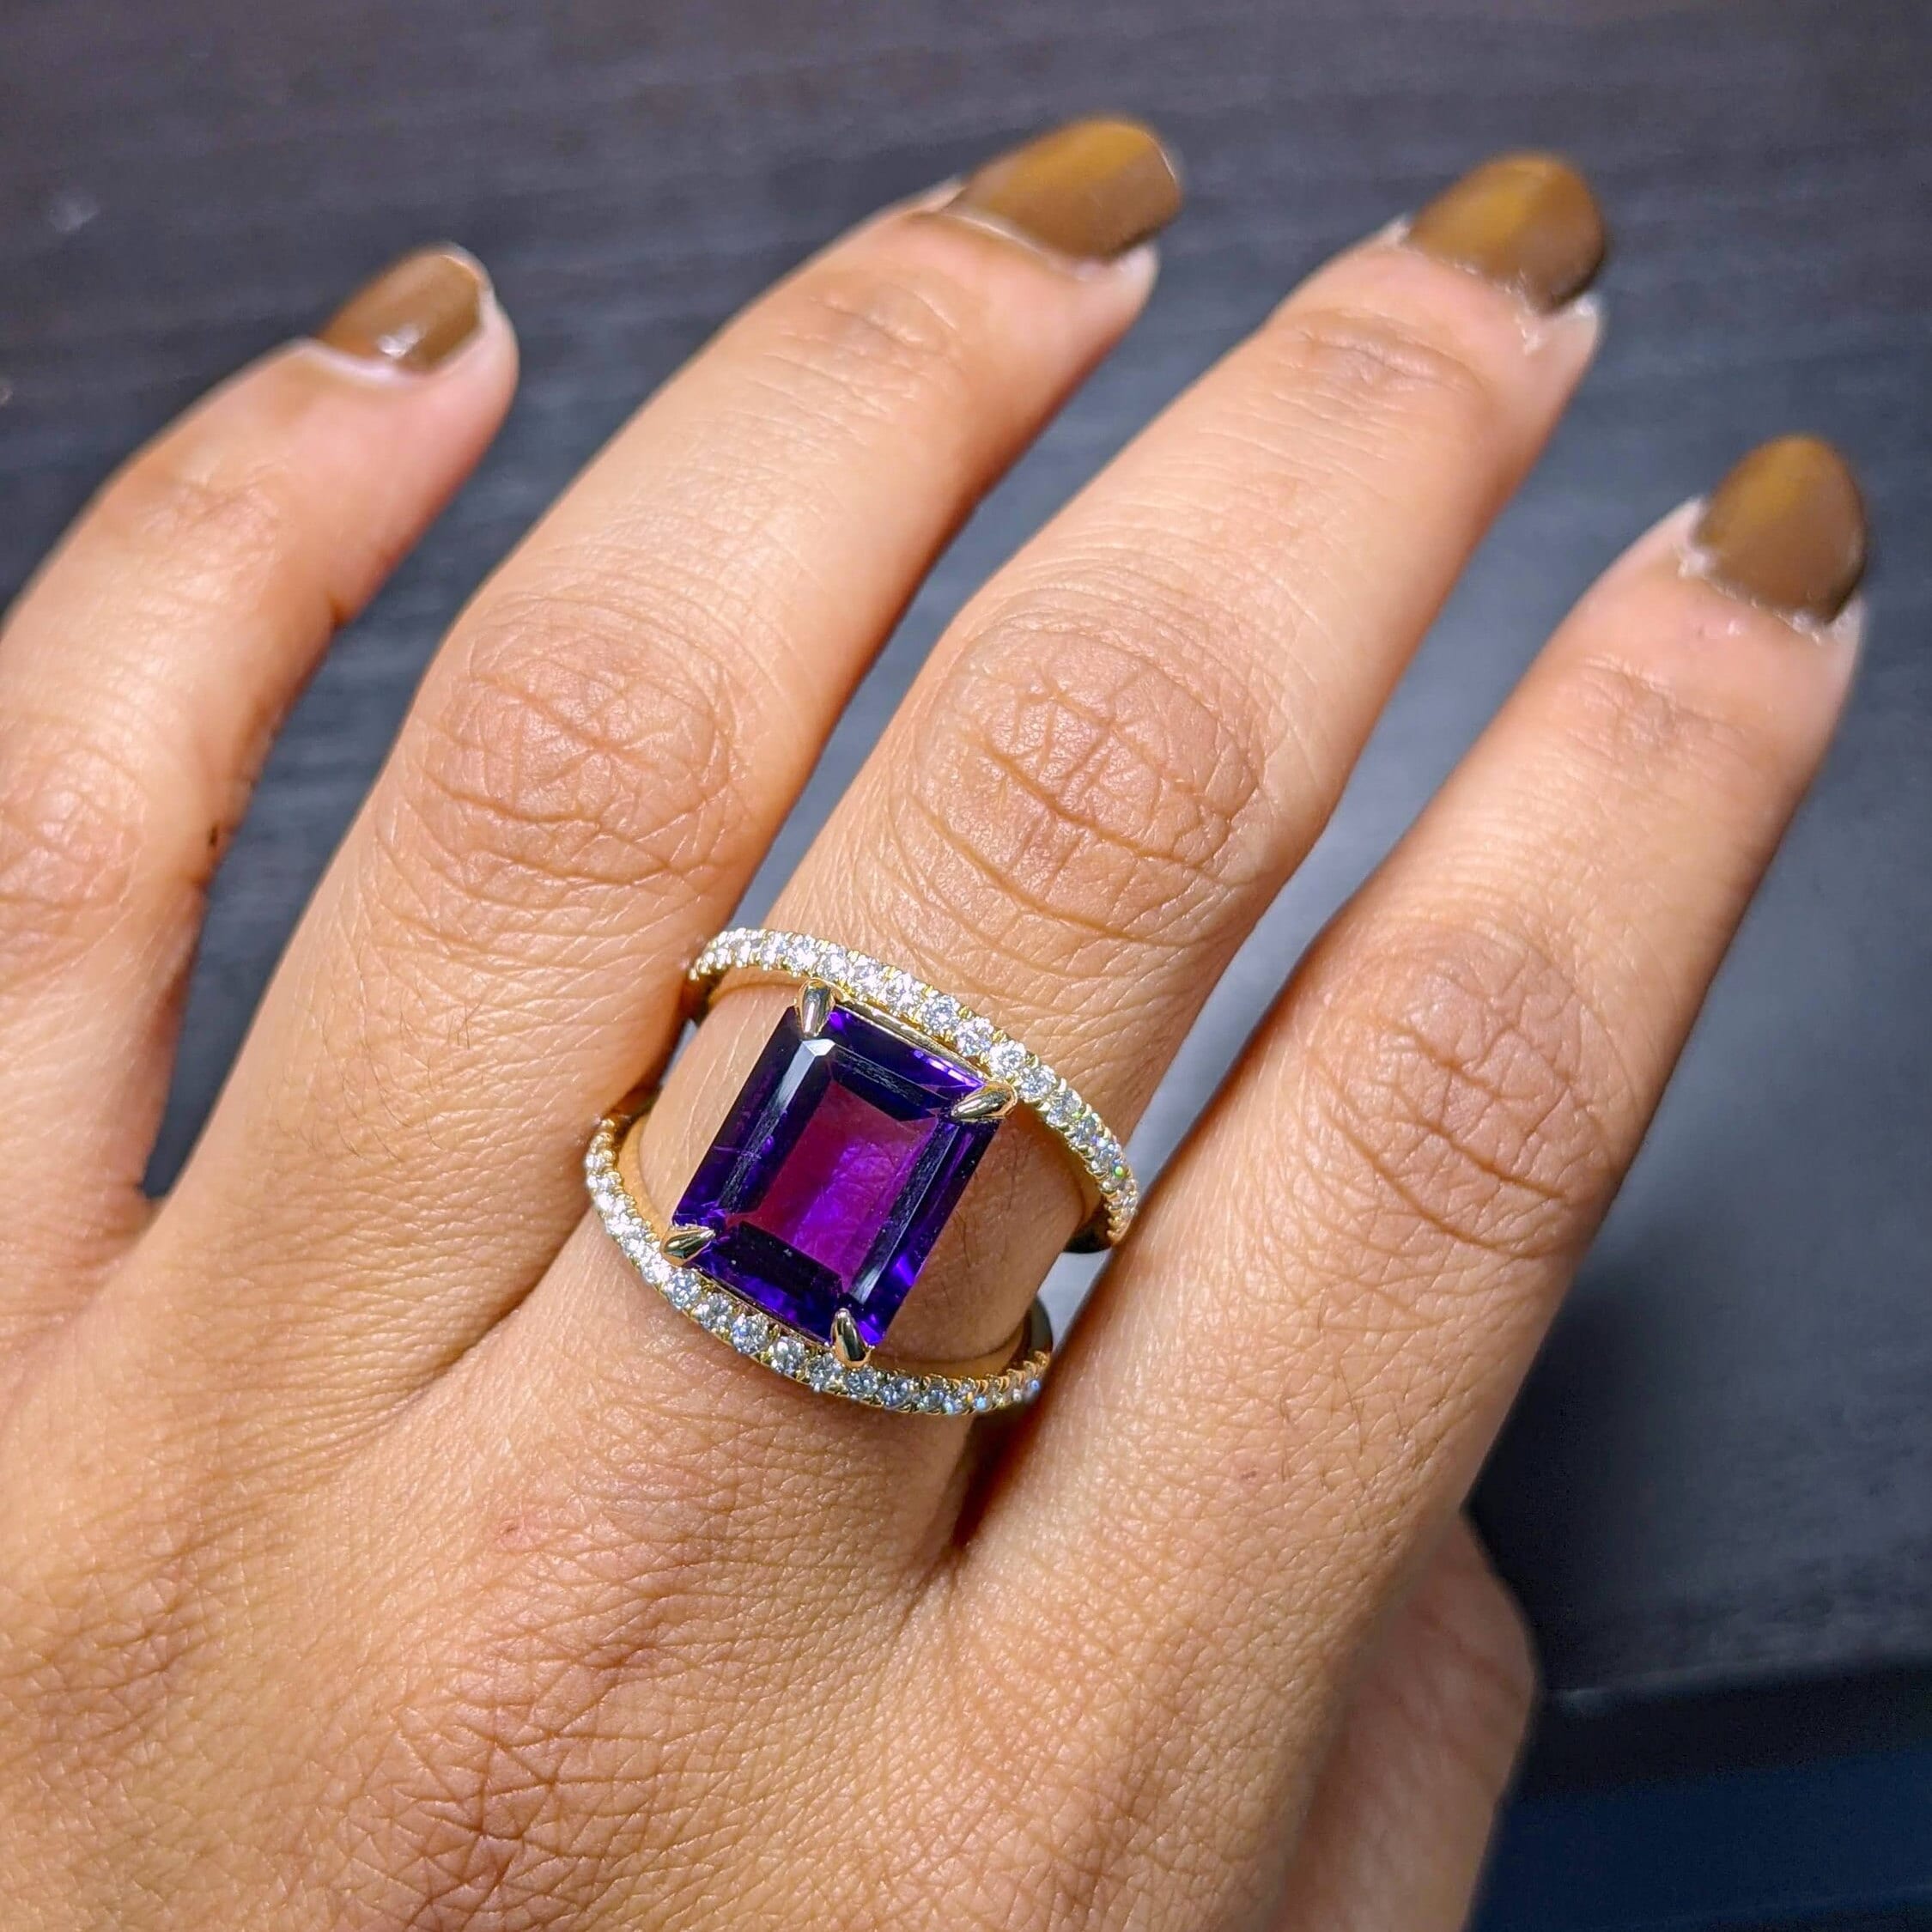 Statement Rings-Large Amethyst Ring w All Natural Diamond Accents in Solid 14k Yellow Gold | Emerald Cut 11x9mm | Open Split Shank | February Birthstone - NNJGemstones